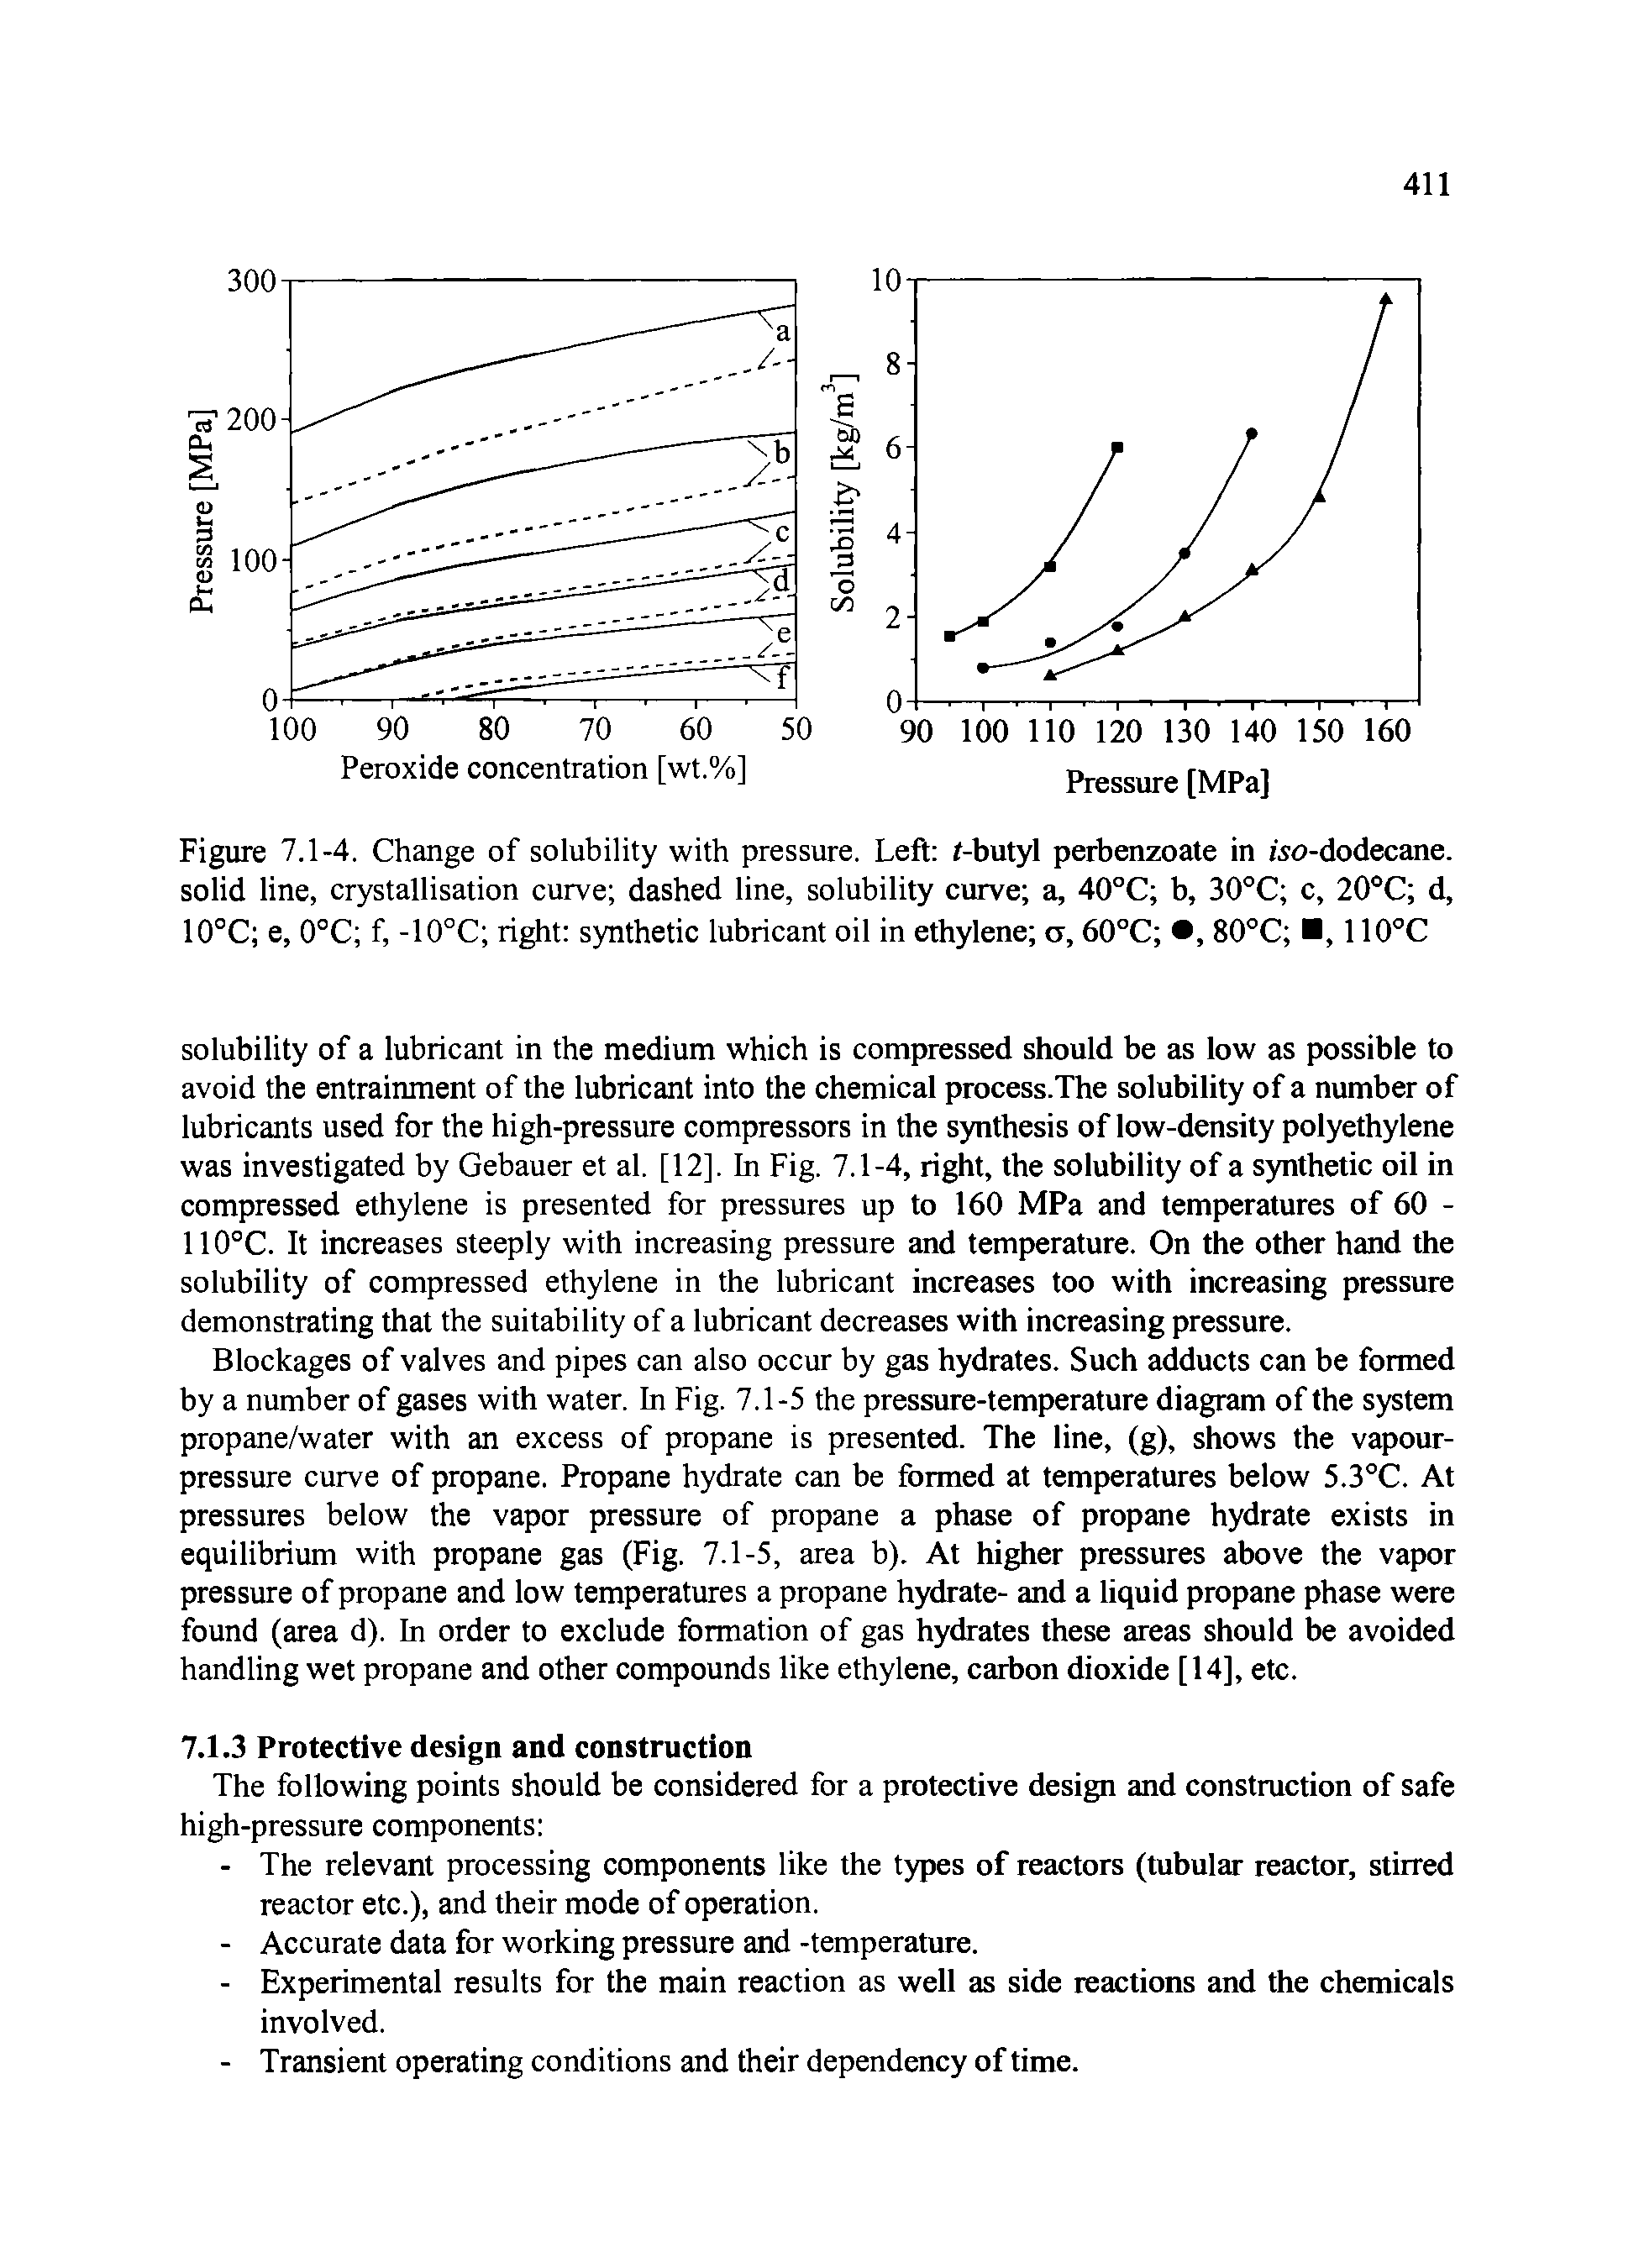 Figure 7.1-4. Change of solubility with pressure. Left t-butyl perbenzoate in wo-dodecane. solid line, crystallisation curve dashed line, solubility curve a, 40°C b, 30°C c, 20°C d, 10°C e, 0°C f, -10°C right synthetic lubricant oil in ethylene a, 60°C , 80°C , 110°C...